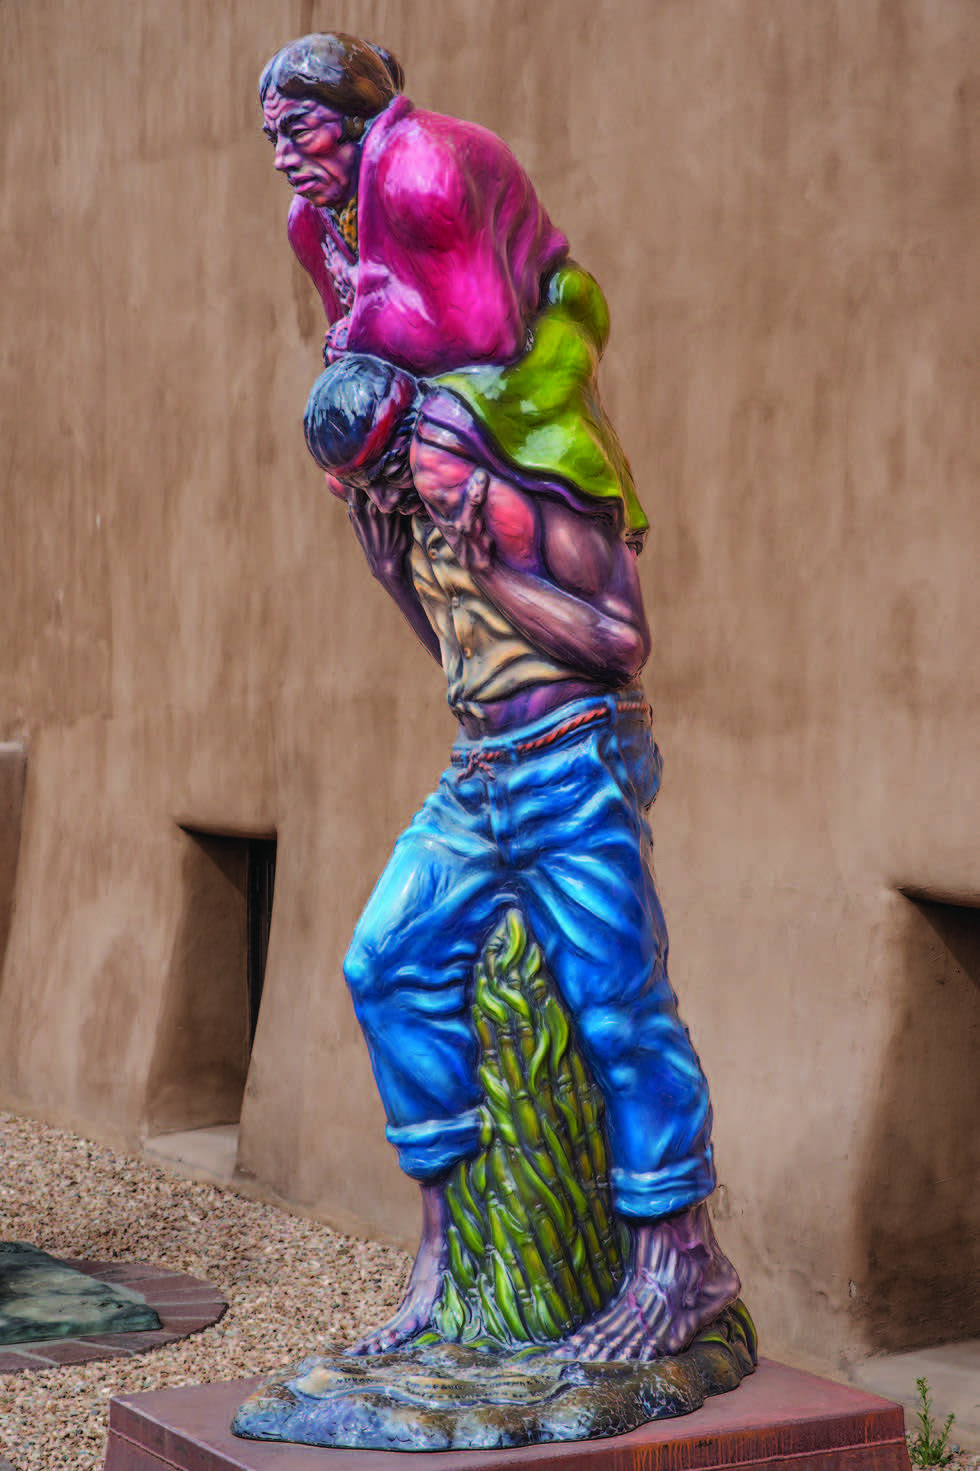 Luis A. Jiménez Jr., Border Crossing, 1989. Polychrome fiberglass, 128 × 40 × 55 in. Collection of the New Mexico Museum of Art. Purchase with funds from the Los Trigos Fund, Herzstein Family Acquisition Endowment Fund, Friends of Contemporary Art, Margot and Robert Linton, and Rosina Yue Smith, 1994 (1994.73.1). © 2015 Estate of Luis A. Jiménez, Jr./Artists Rights Society (ARS), New York.